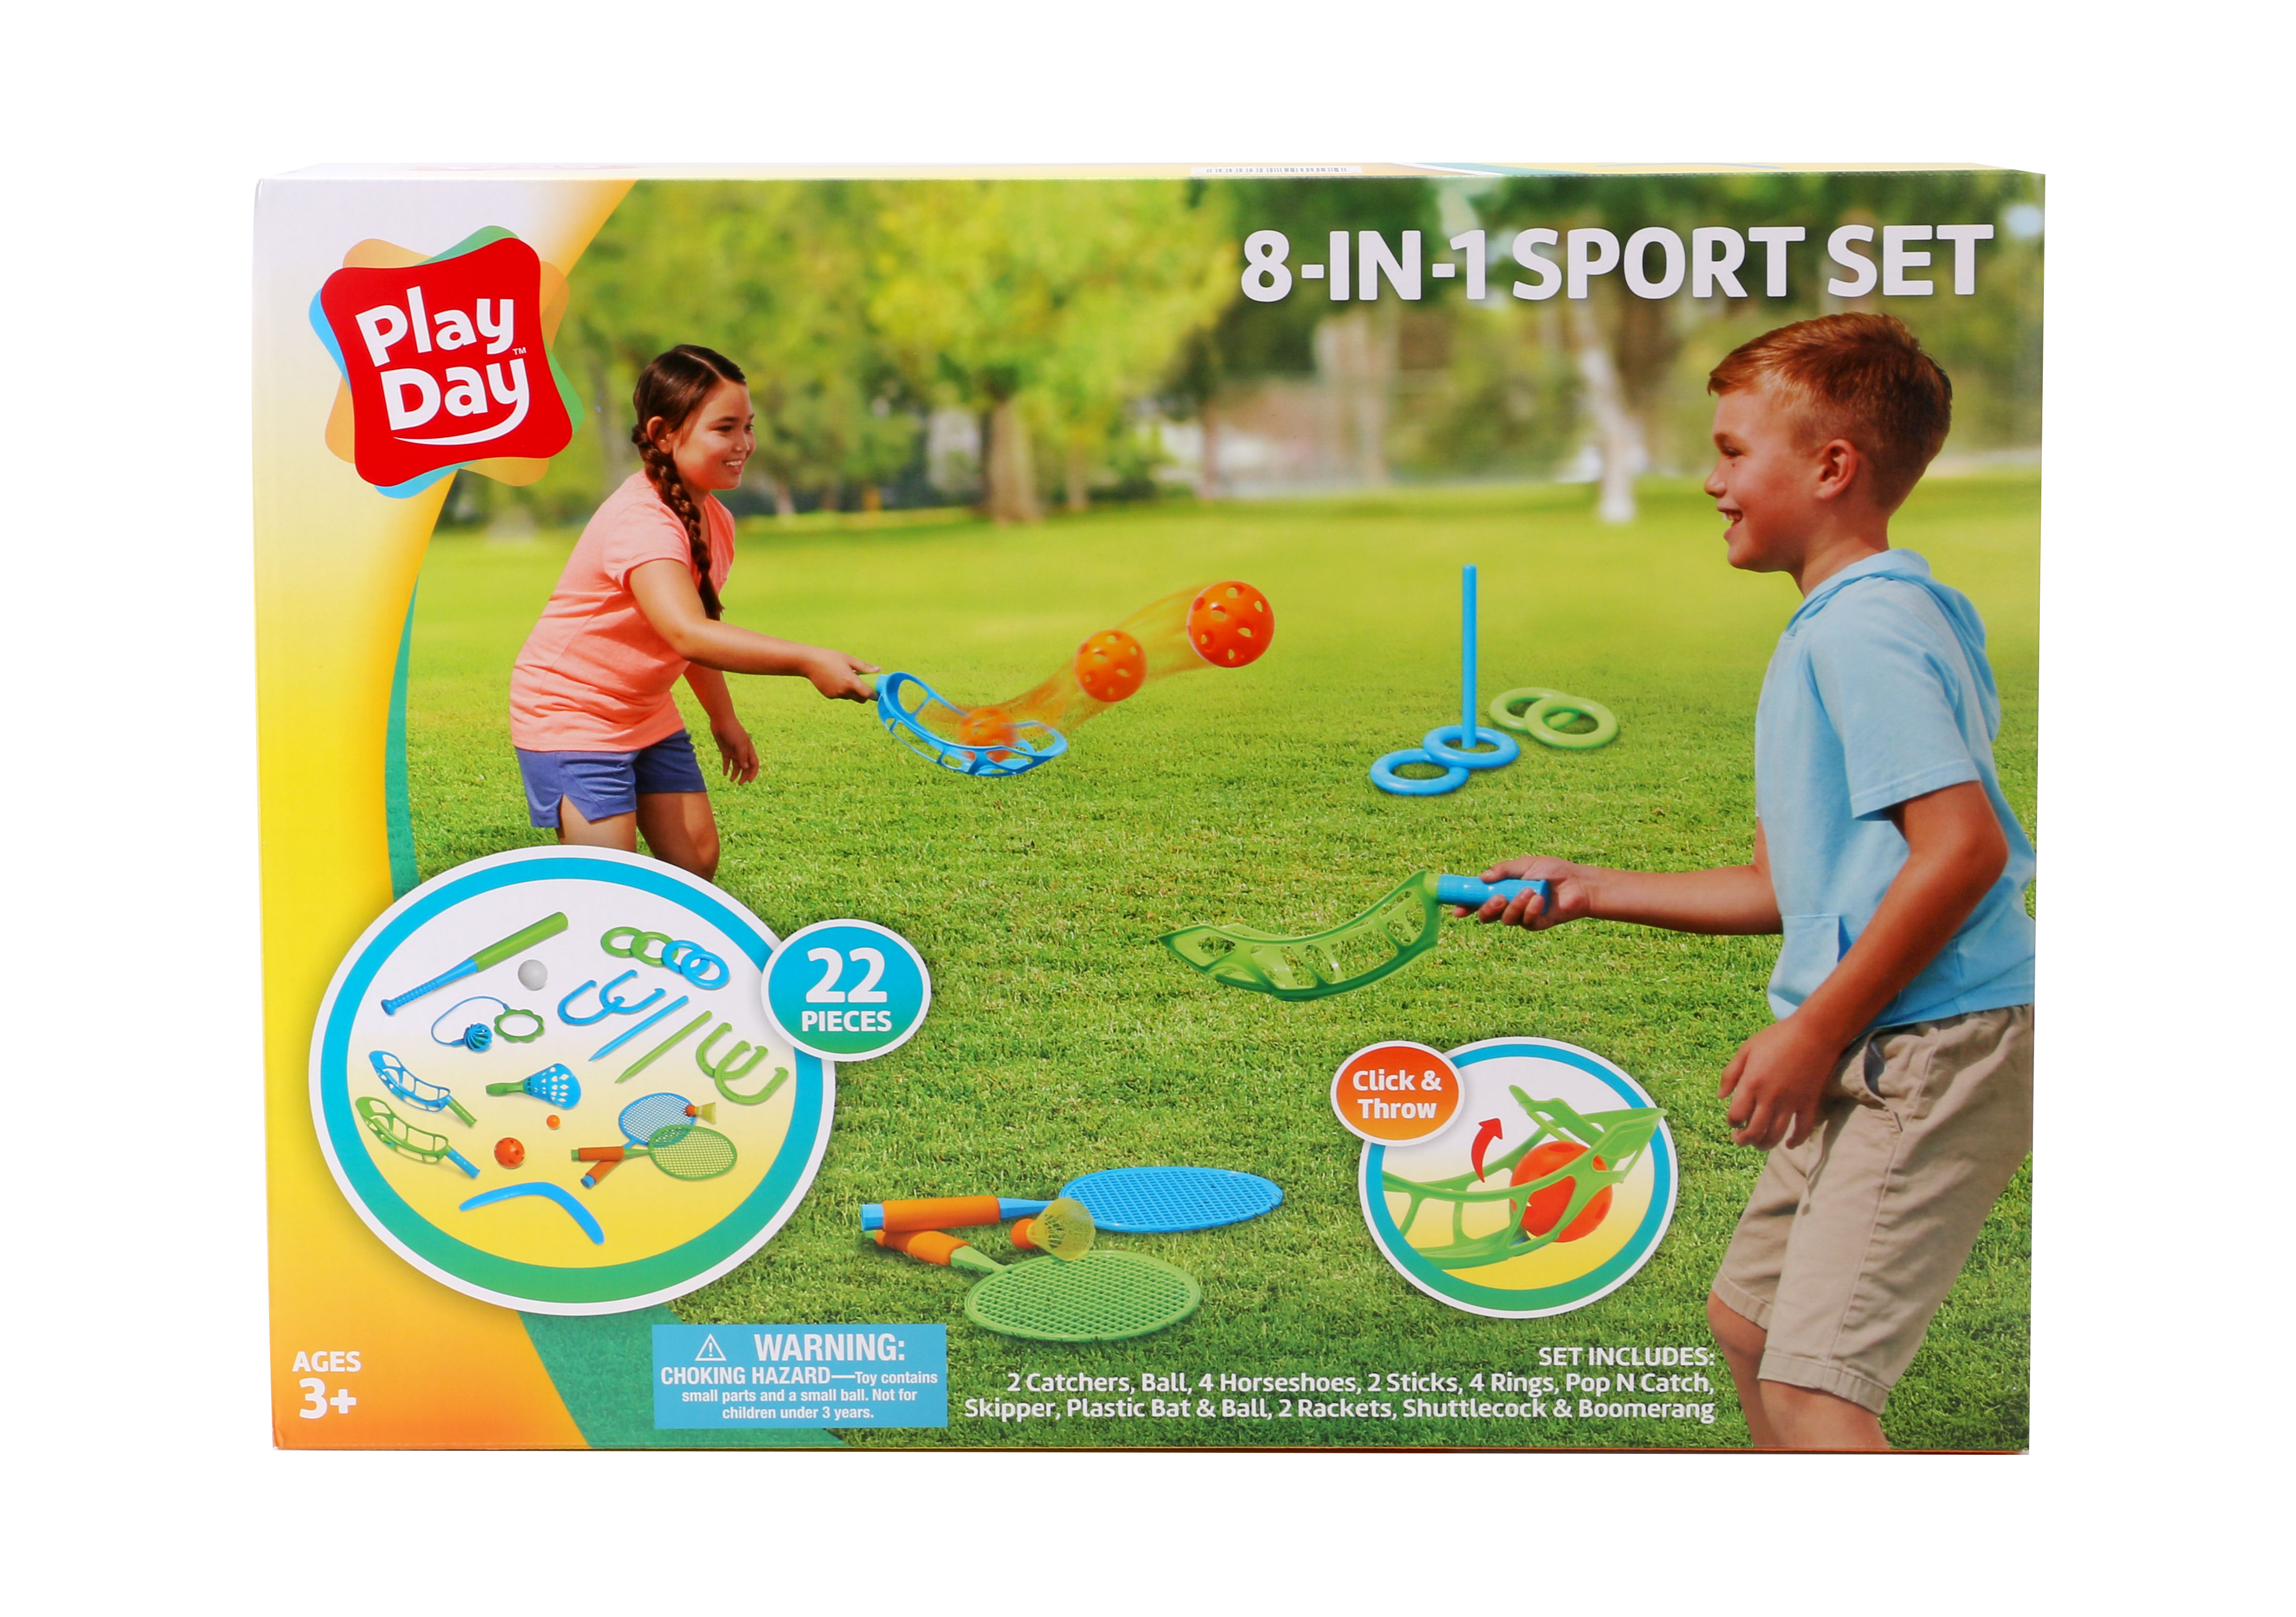 Play Day 8-in-1 Combo Lawn Game Sport Set, 22 Pieces, Children Ages 3+ - image 4 of 5